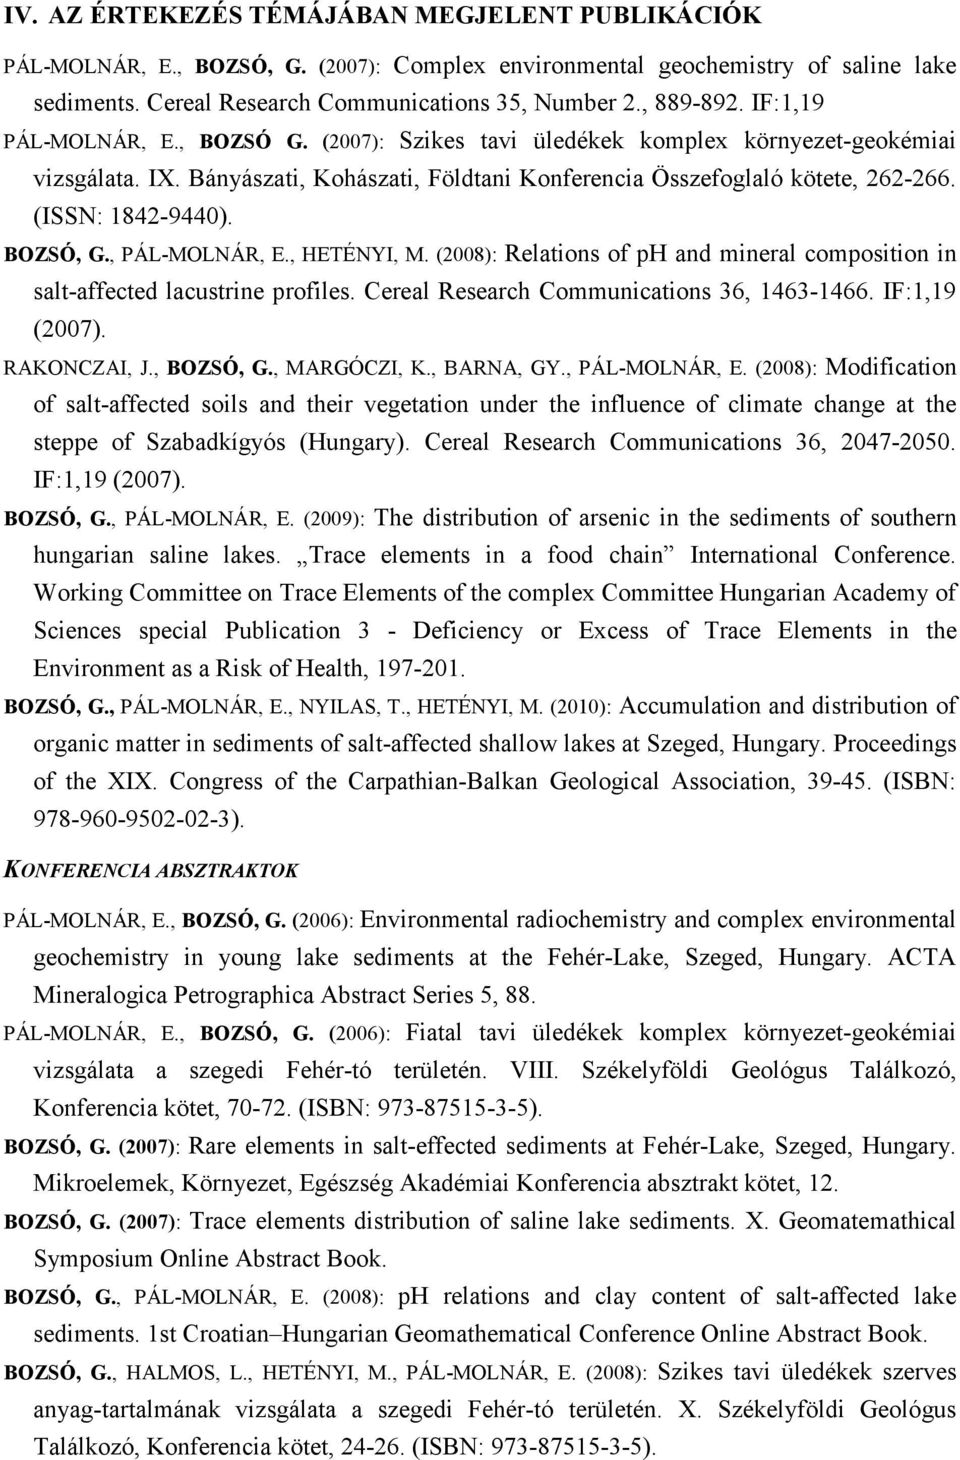 BOZSÓ, G., PÁL-MOLNÁR, E., HETÉNYI, M. (2008): Relations of ph and mineral composition in salt-affected lacustrine profiles. Cereal Research Communications 36, 1463-1466. IF:1,19 (2007). RAKONCZAI, J.